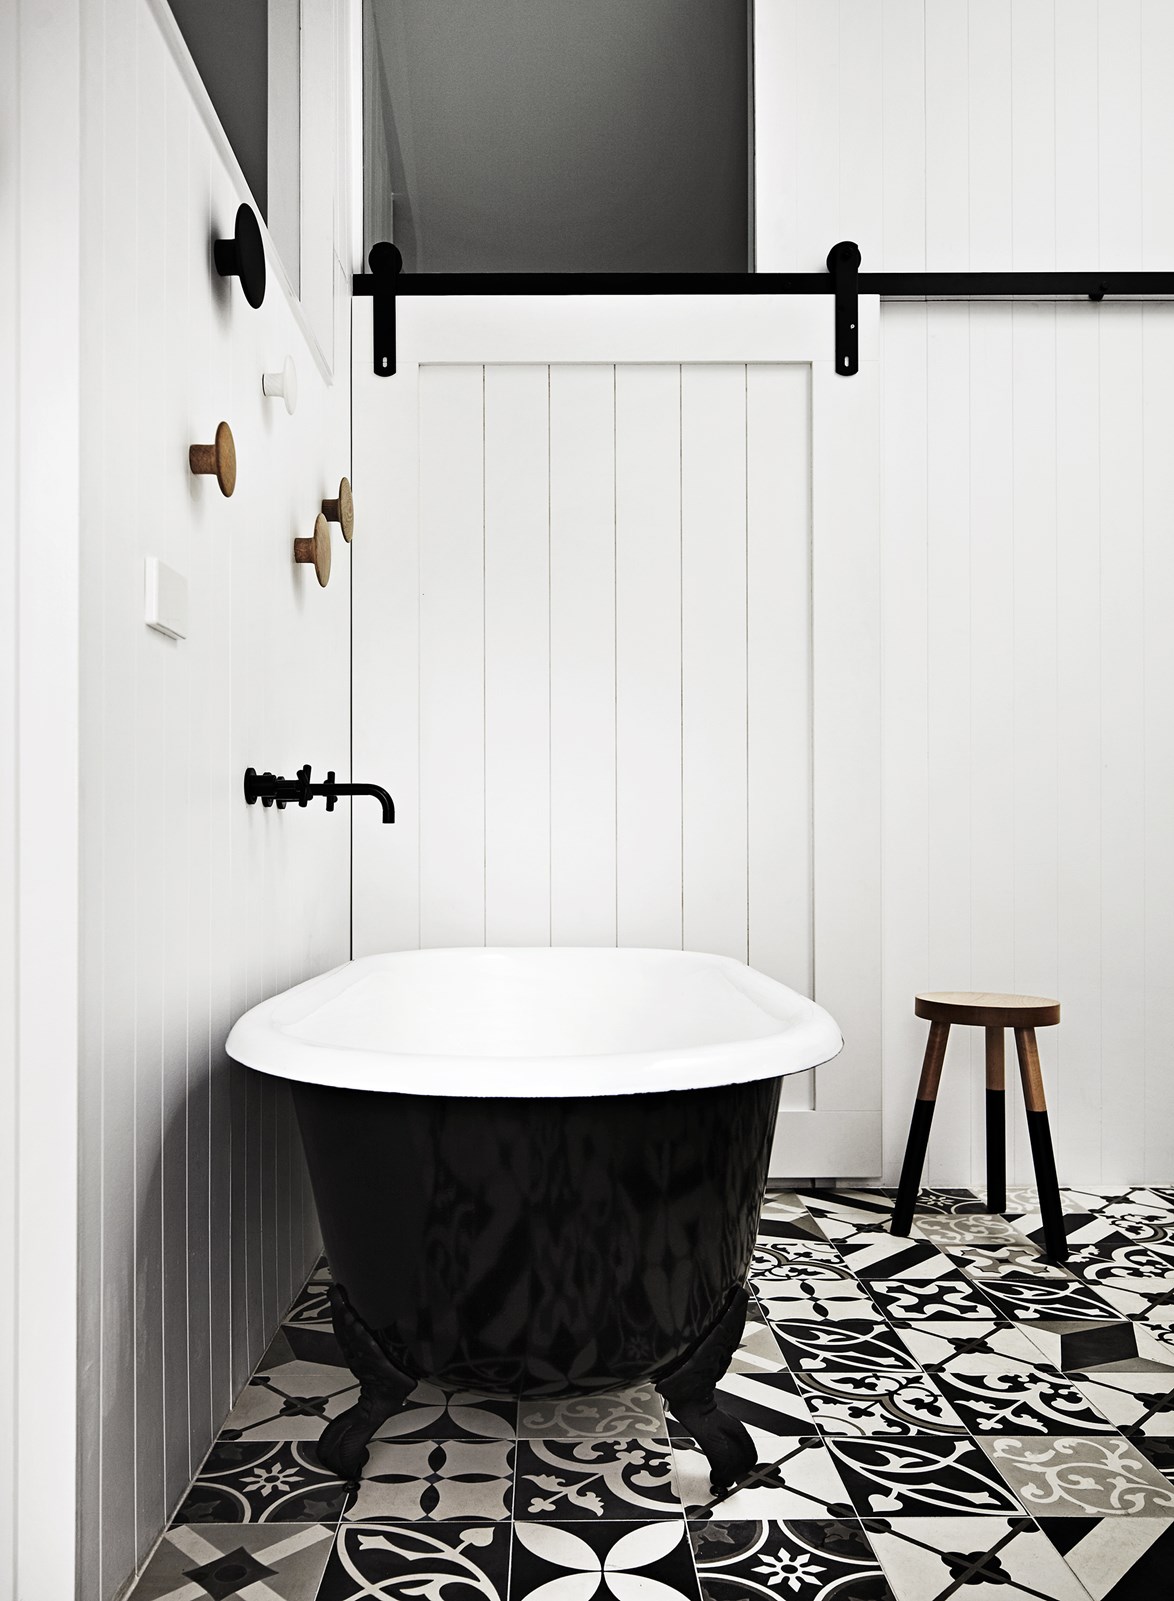 An unexpected hit of pattern is delivered in the monochromatic floor tiles from Bespoke Tile & Stone, in this classic monochrome bathroom.